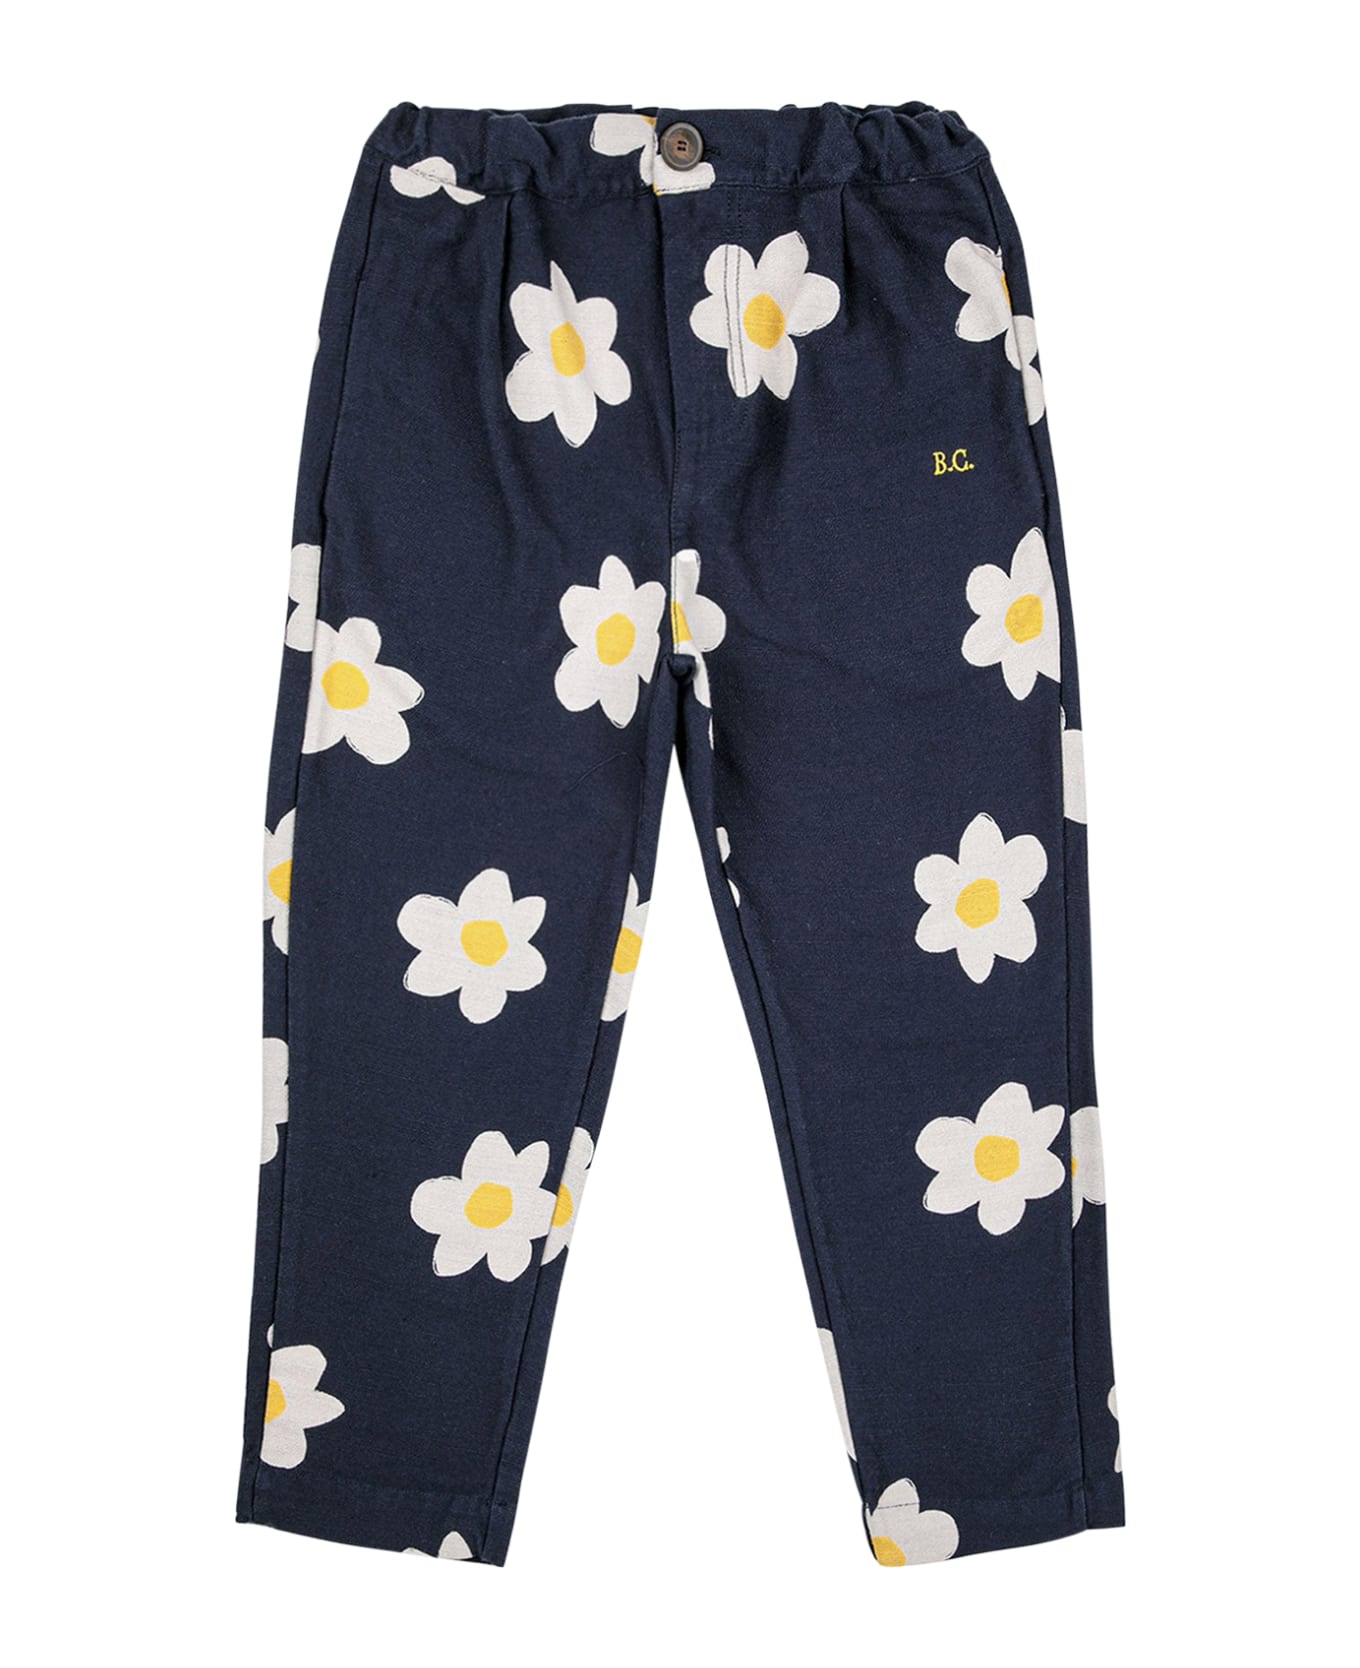 Bobo Choses Blue Trousers For Girl With Daisies - Blue